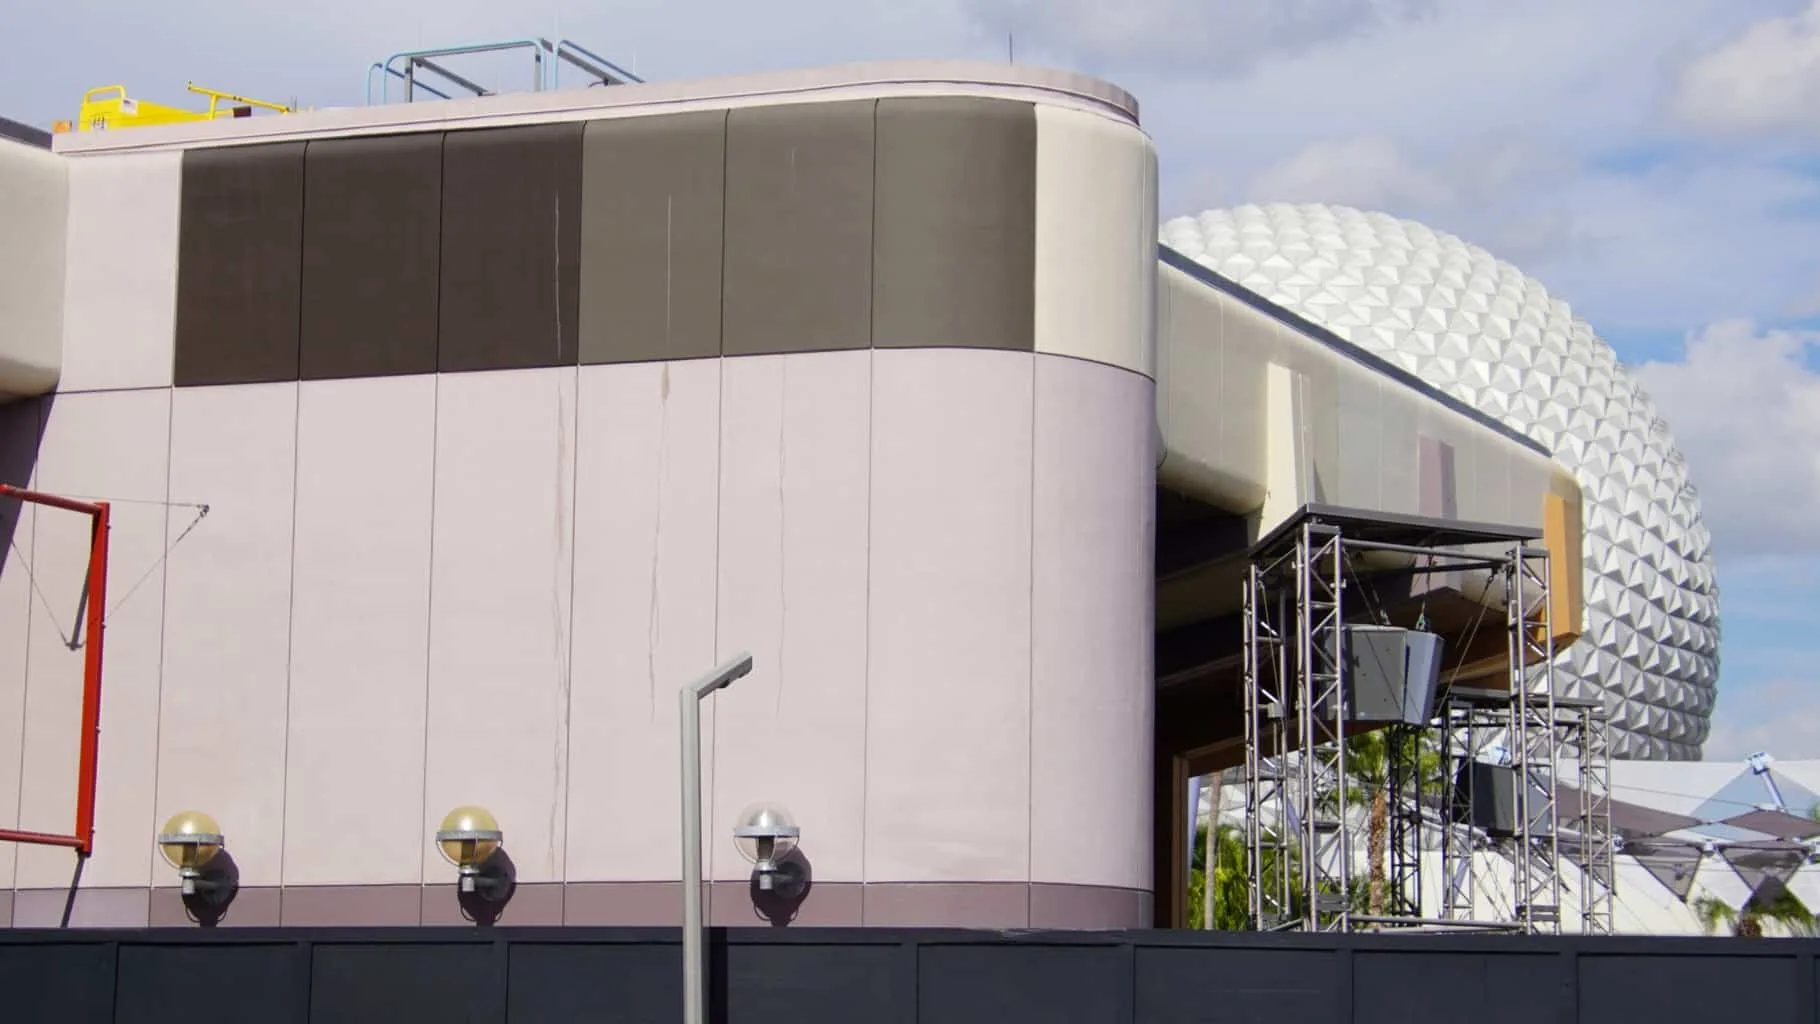 speakers down Innoventions West Epcot Construction Updates November 2019